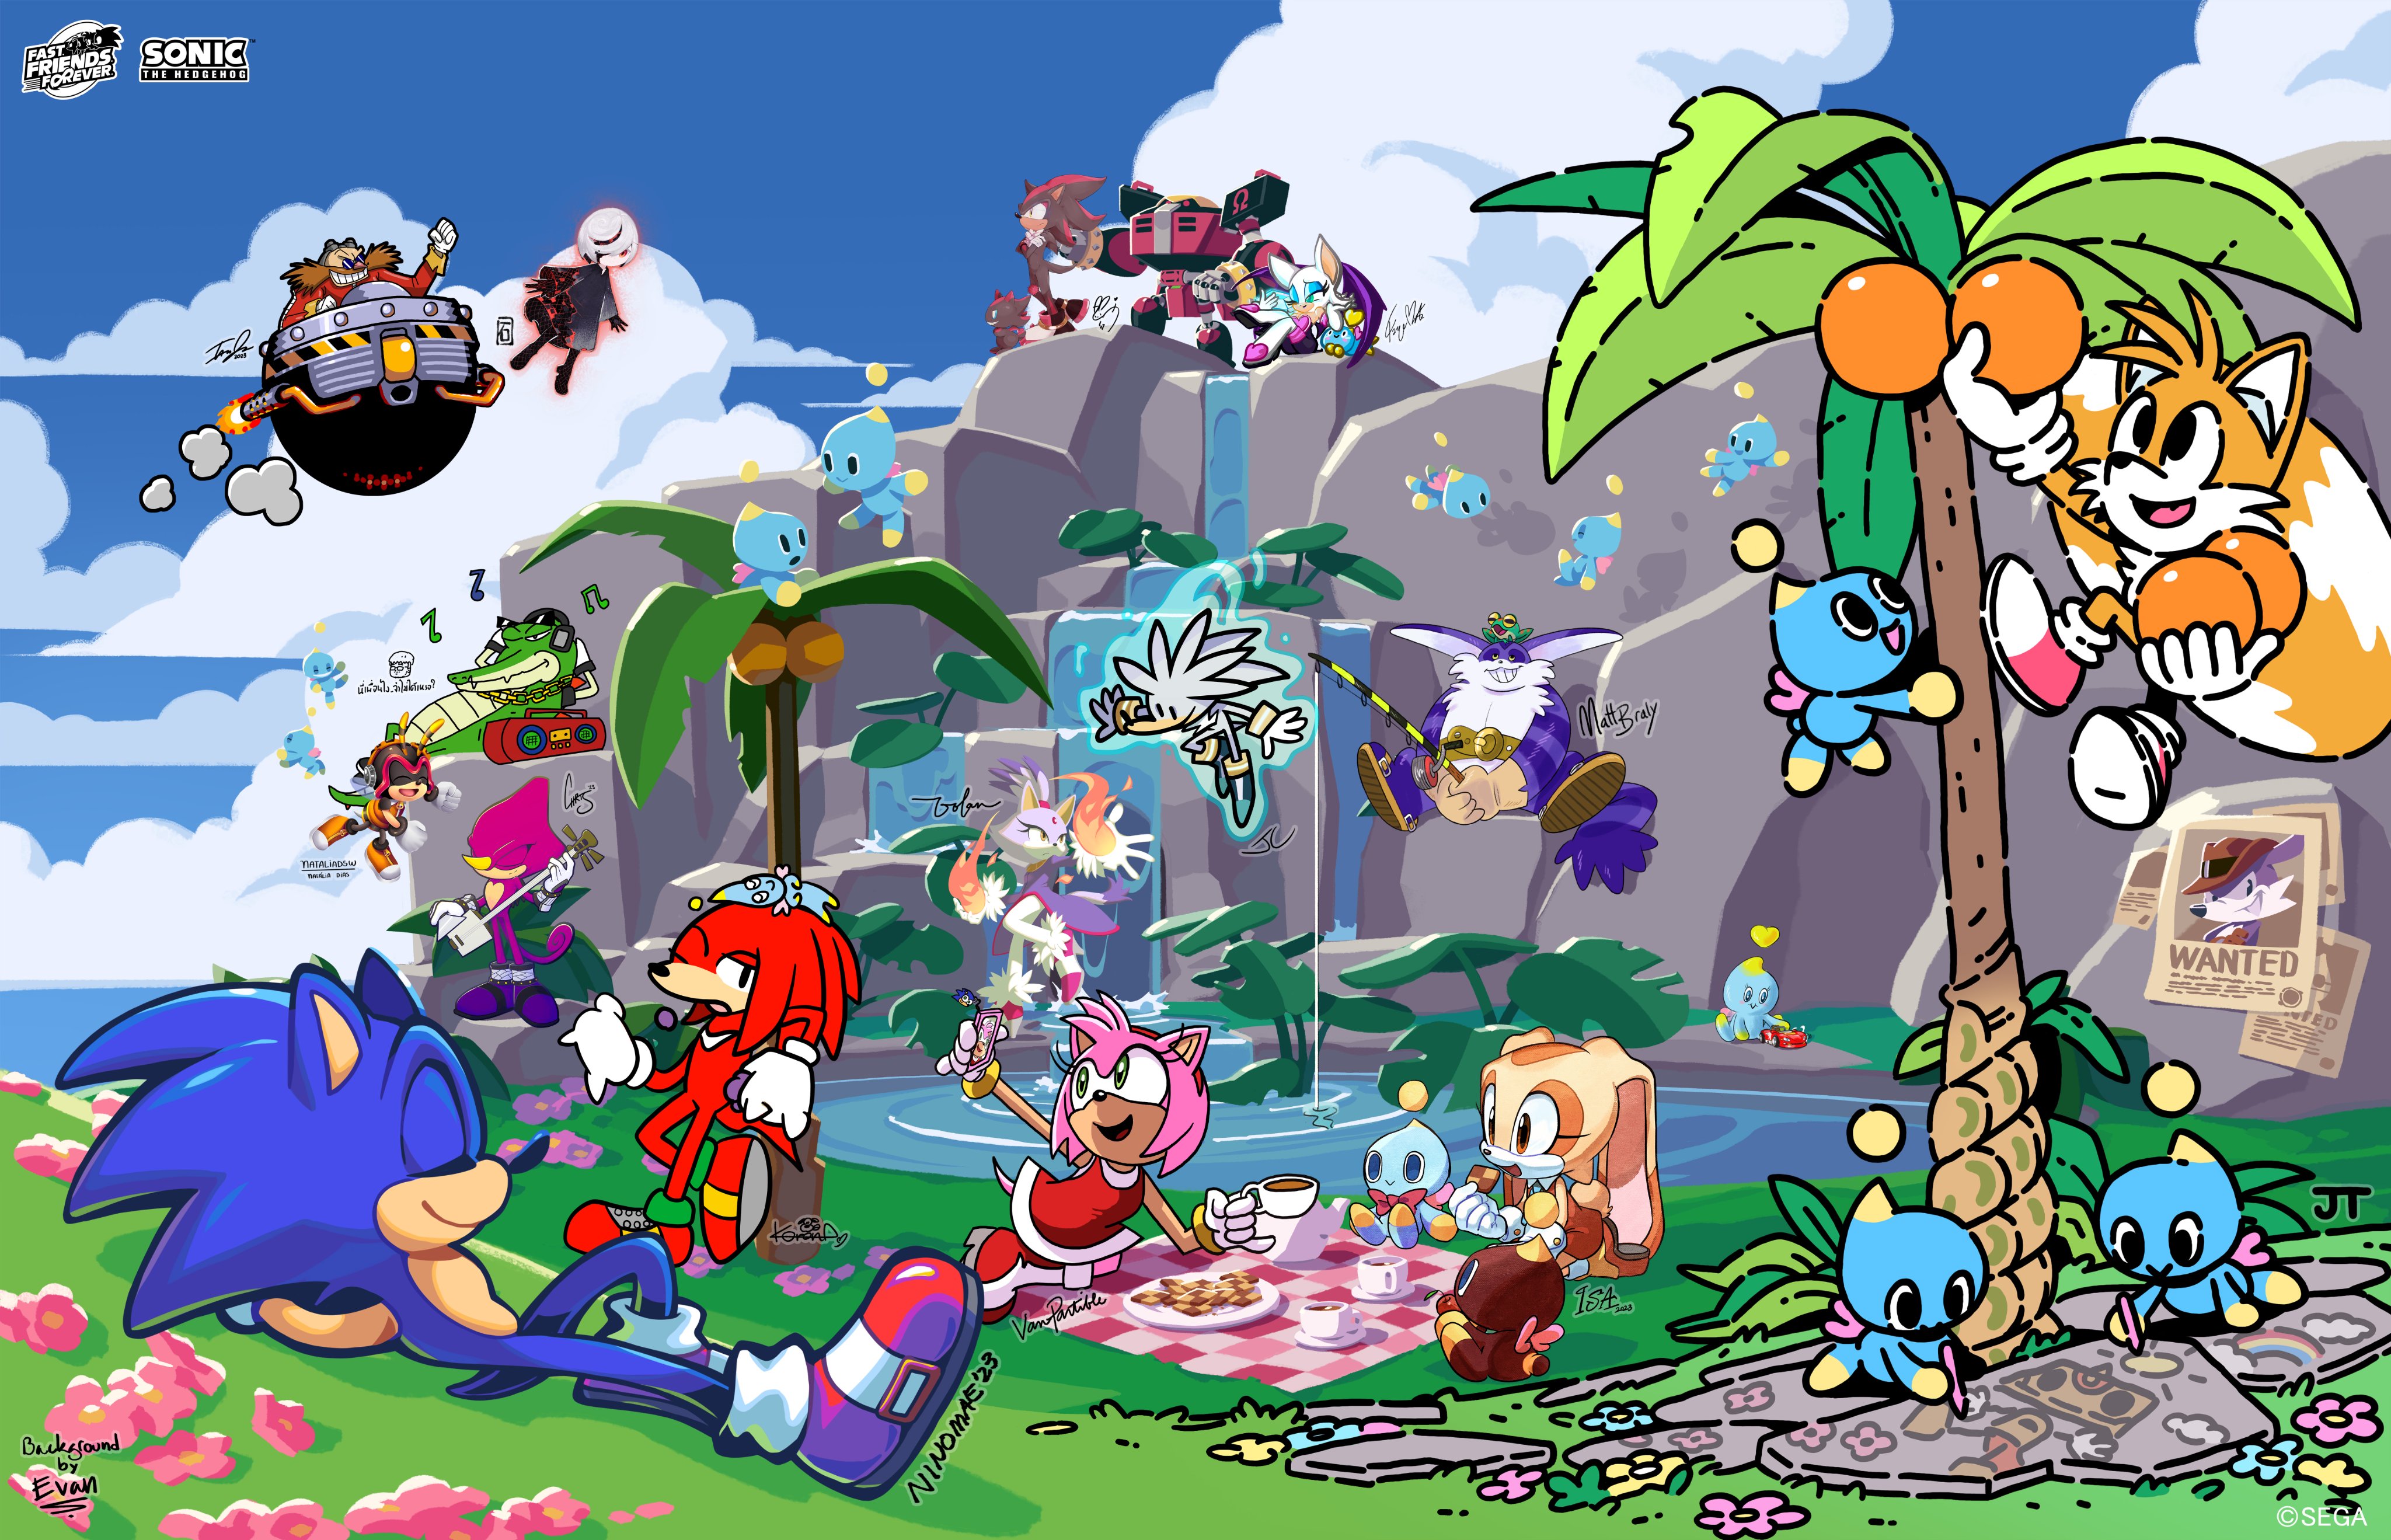 Sonic's Chao Garden Is The Series' Biggest Missed Opportunity